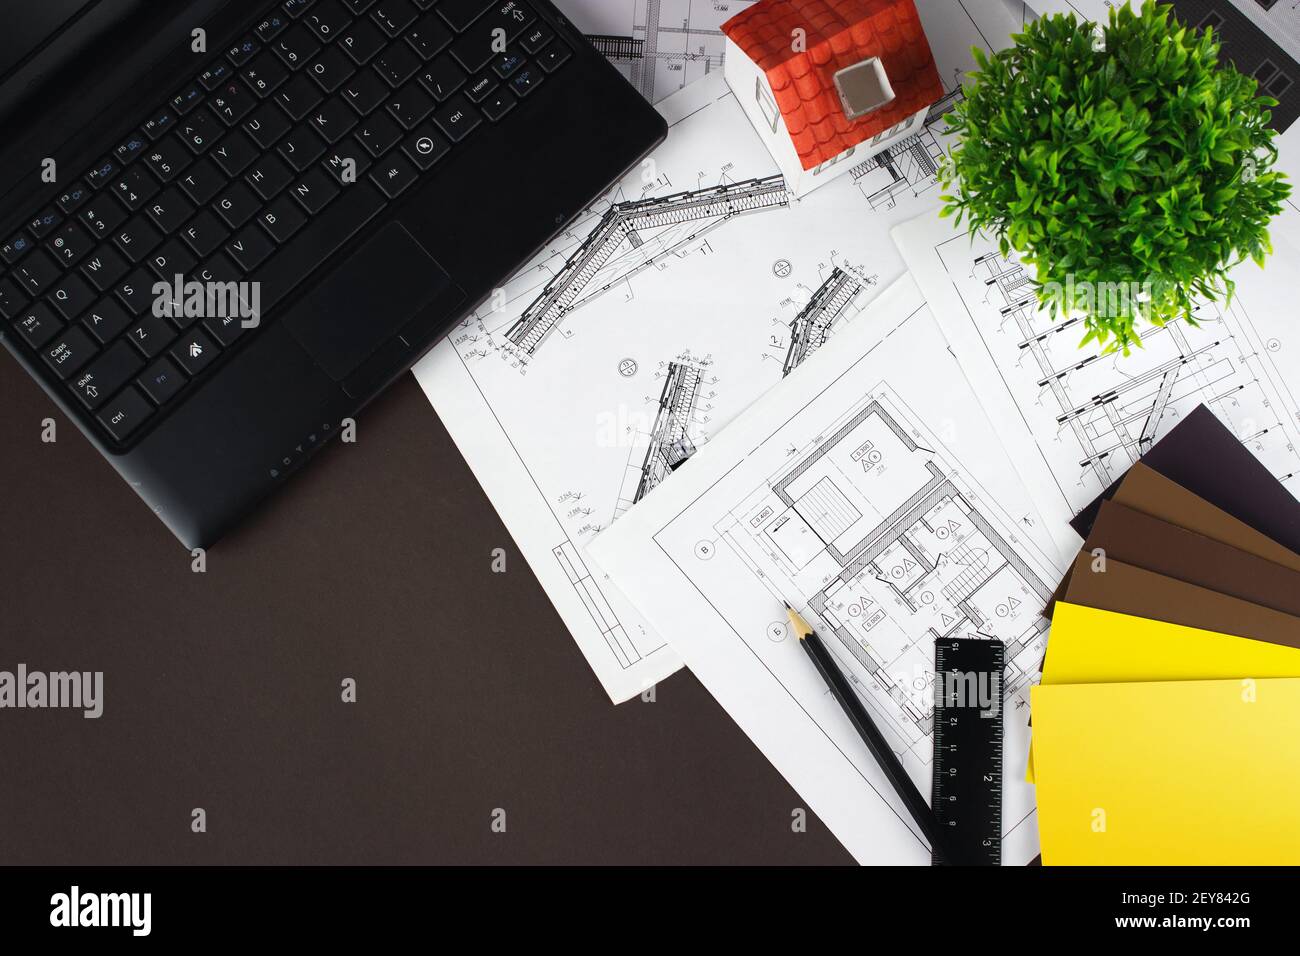 Architect workplace top view. White house on the construction drawings, laptop pen and color samples Stock Photo